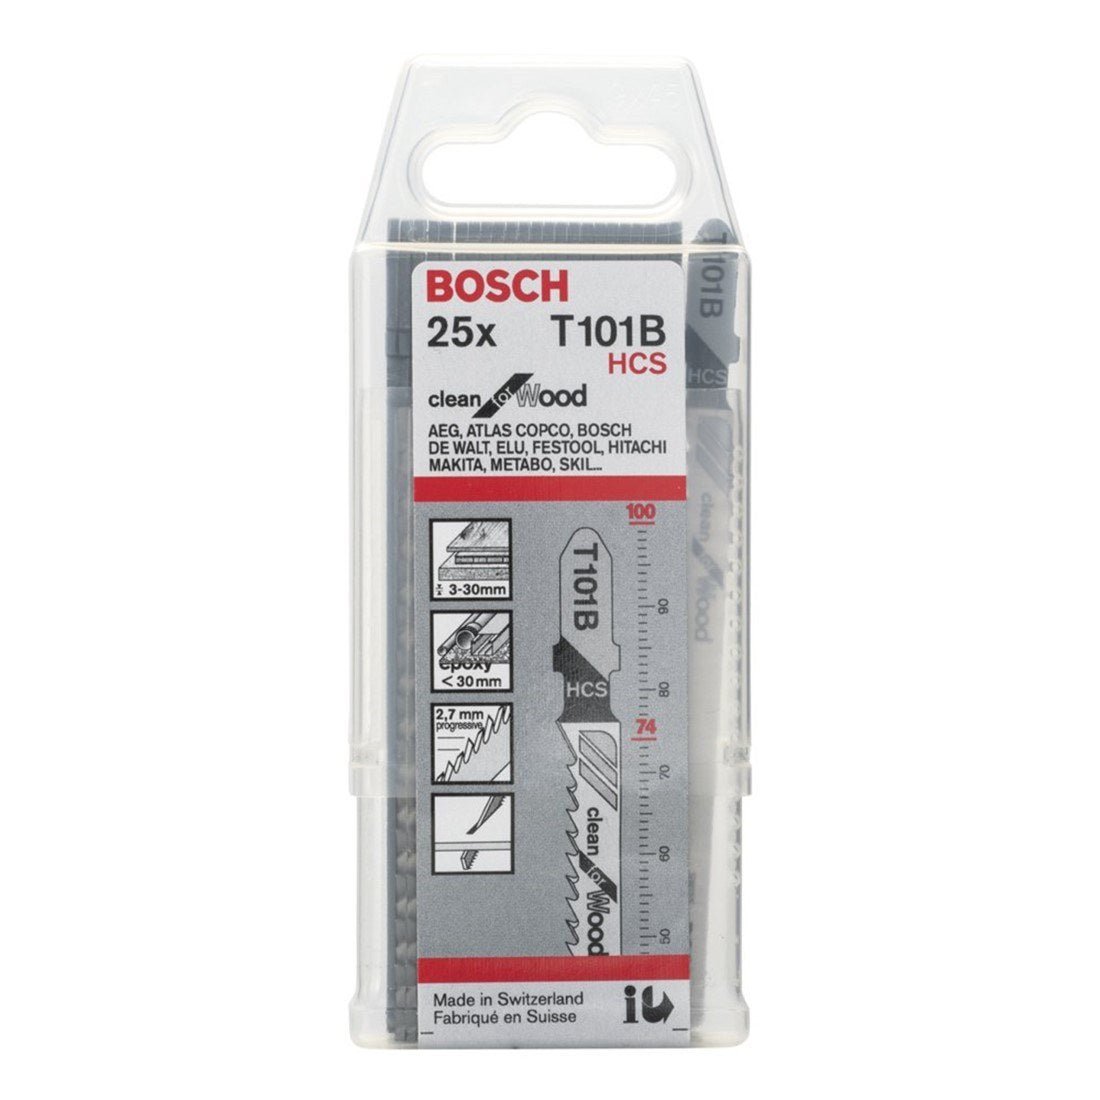 Bosch Jigsaw Blades T 101 B Clean for Wood 25 Pack 2608633622 Power Tool Services